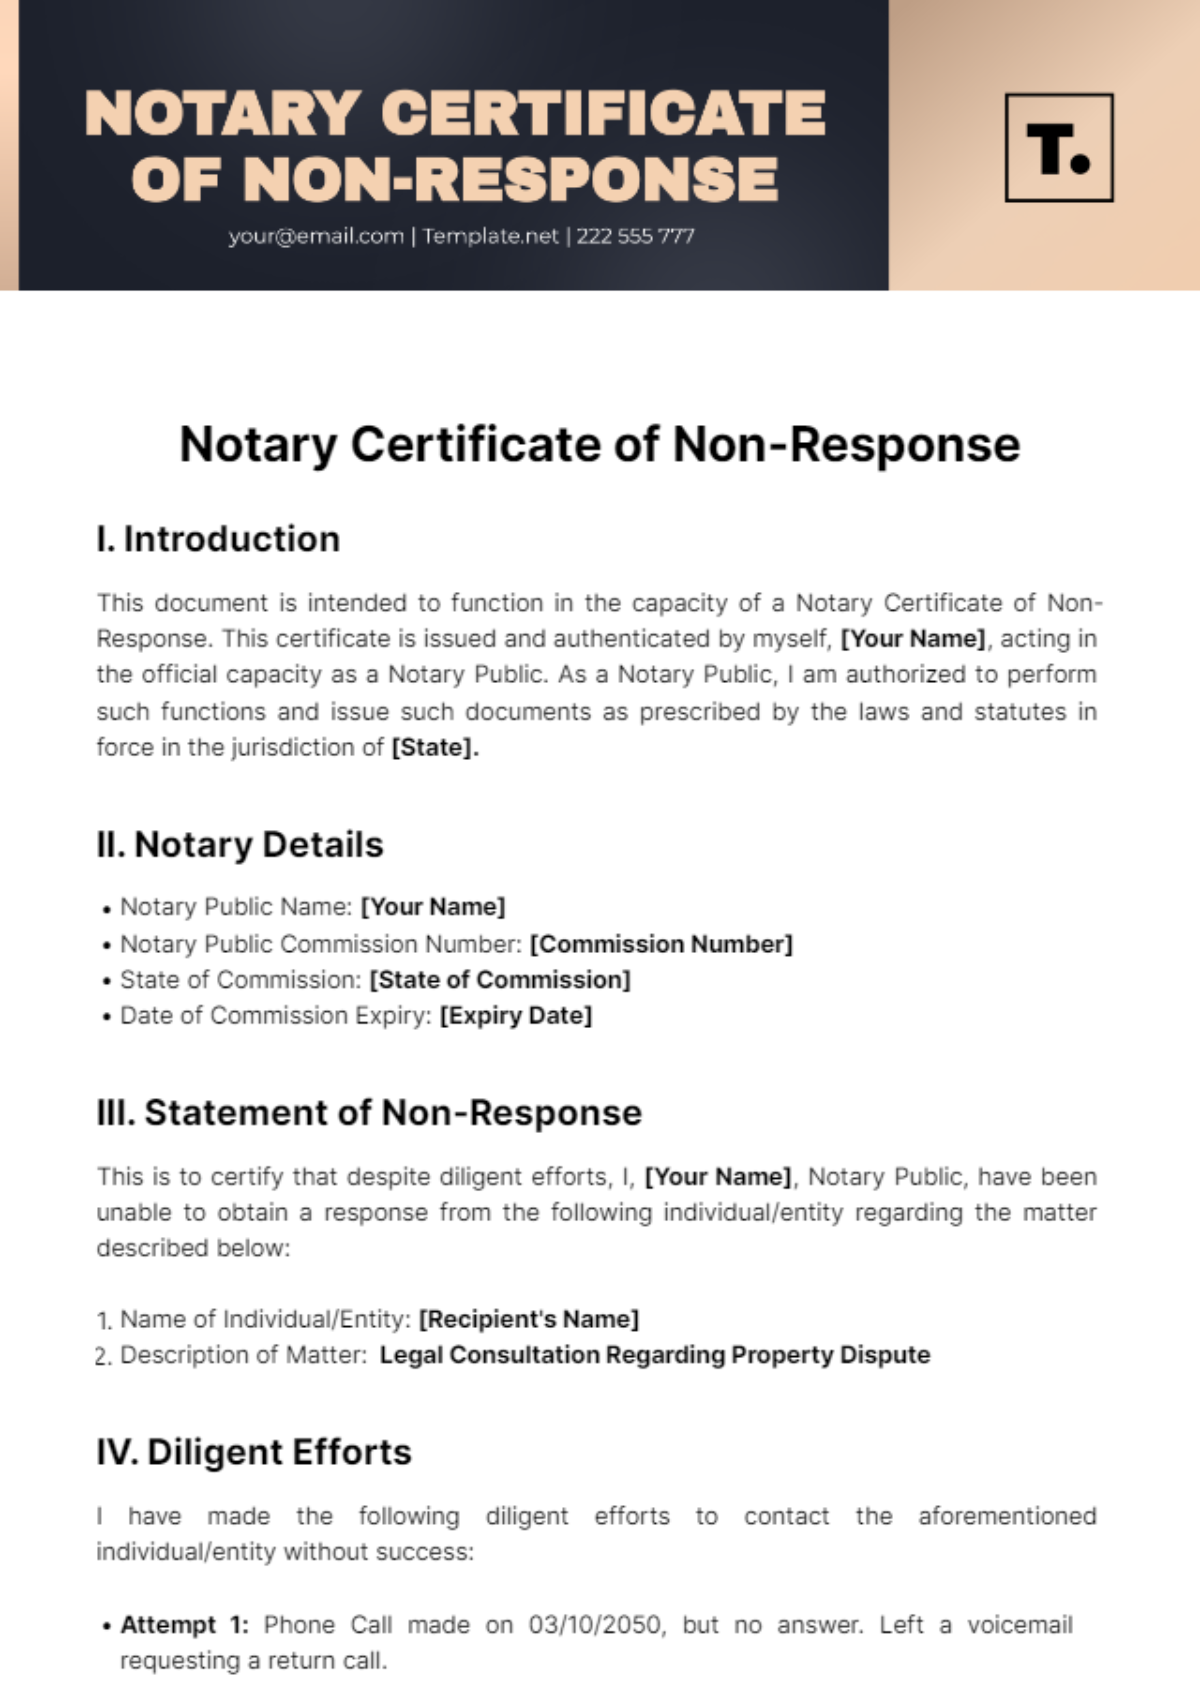 Free Notary Certificate Of Non-Response Template